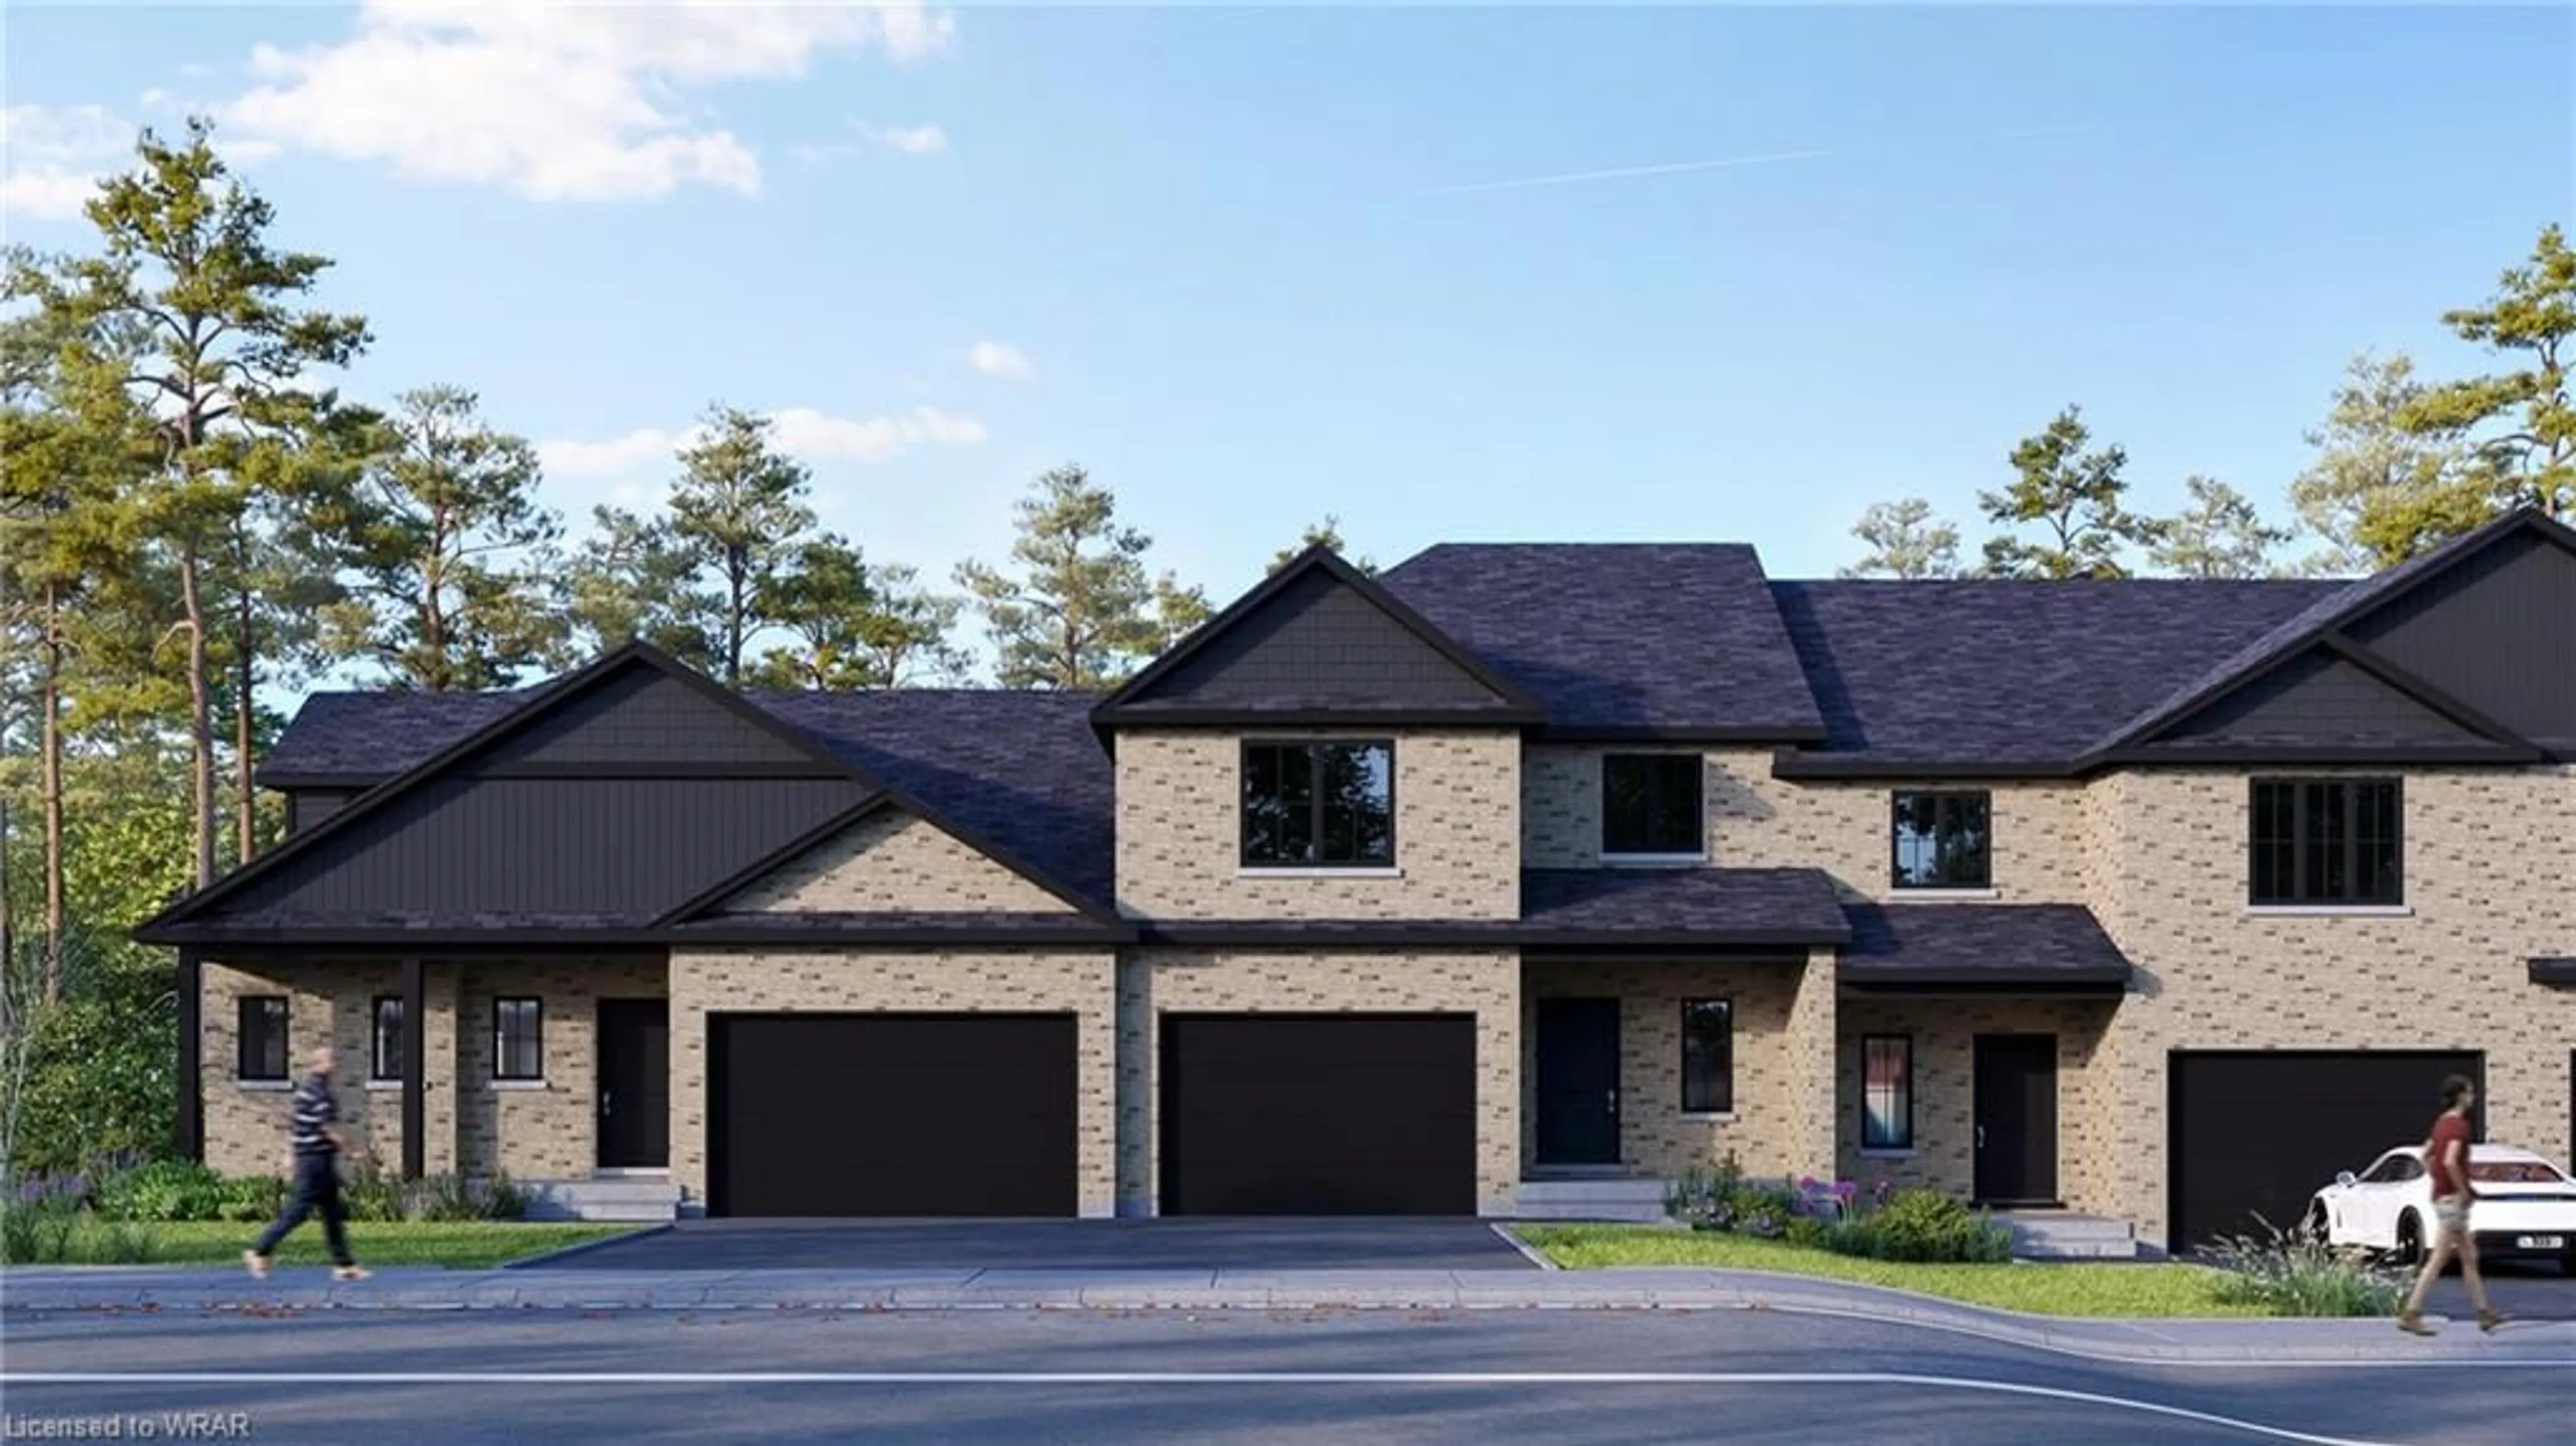 Home with brick exterior material for 666 Wray Ave, Listowel Ontario N4W 3K9